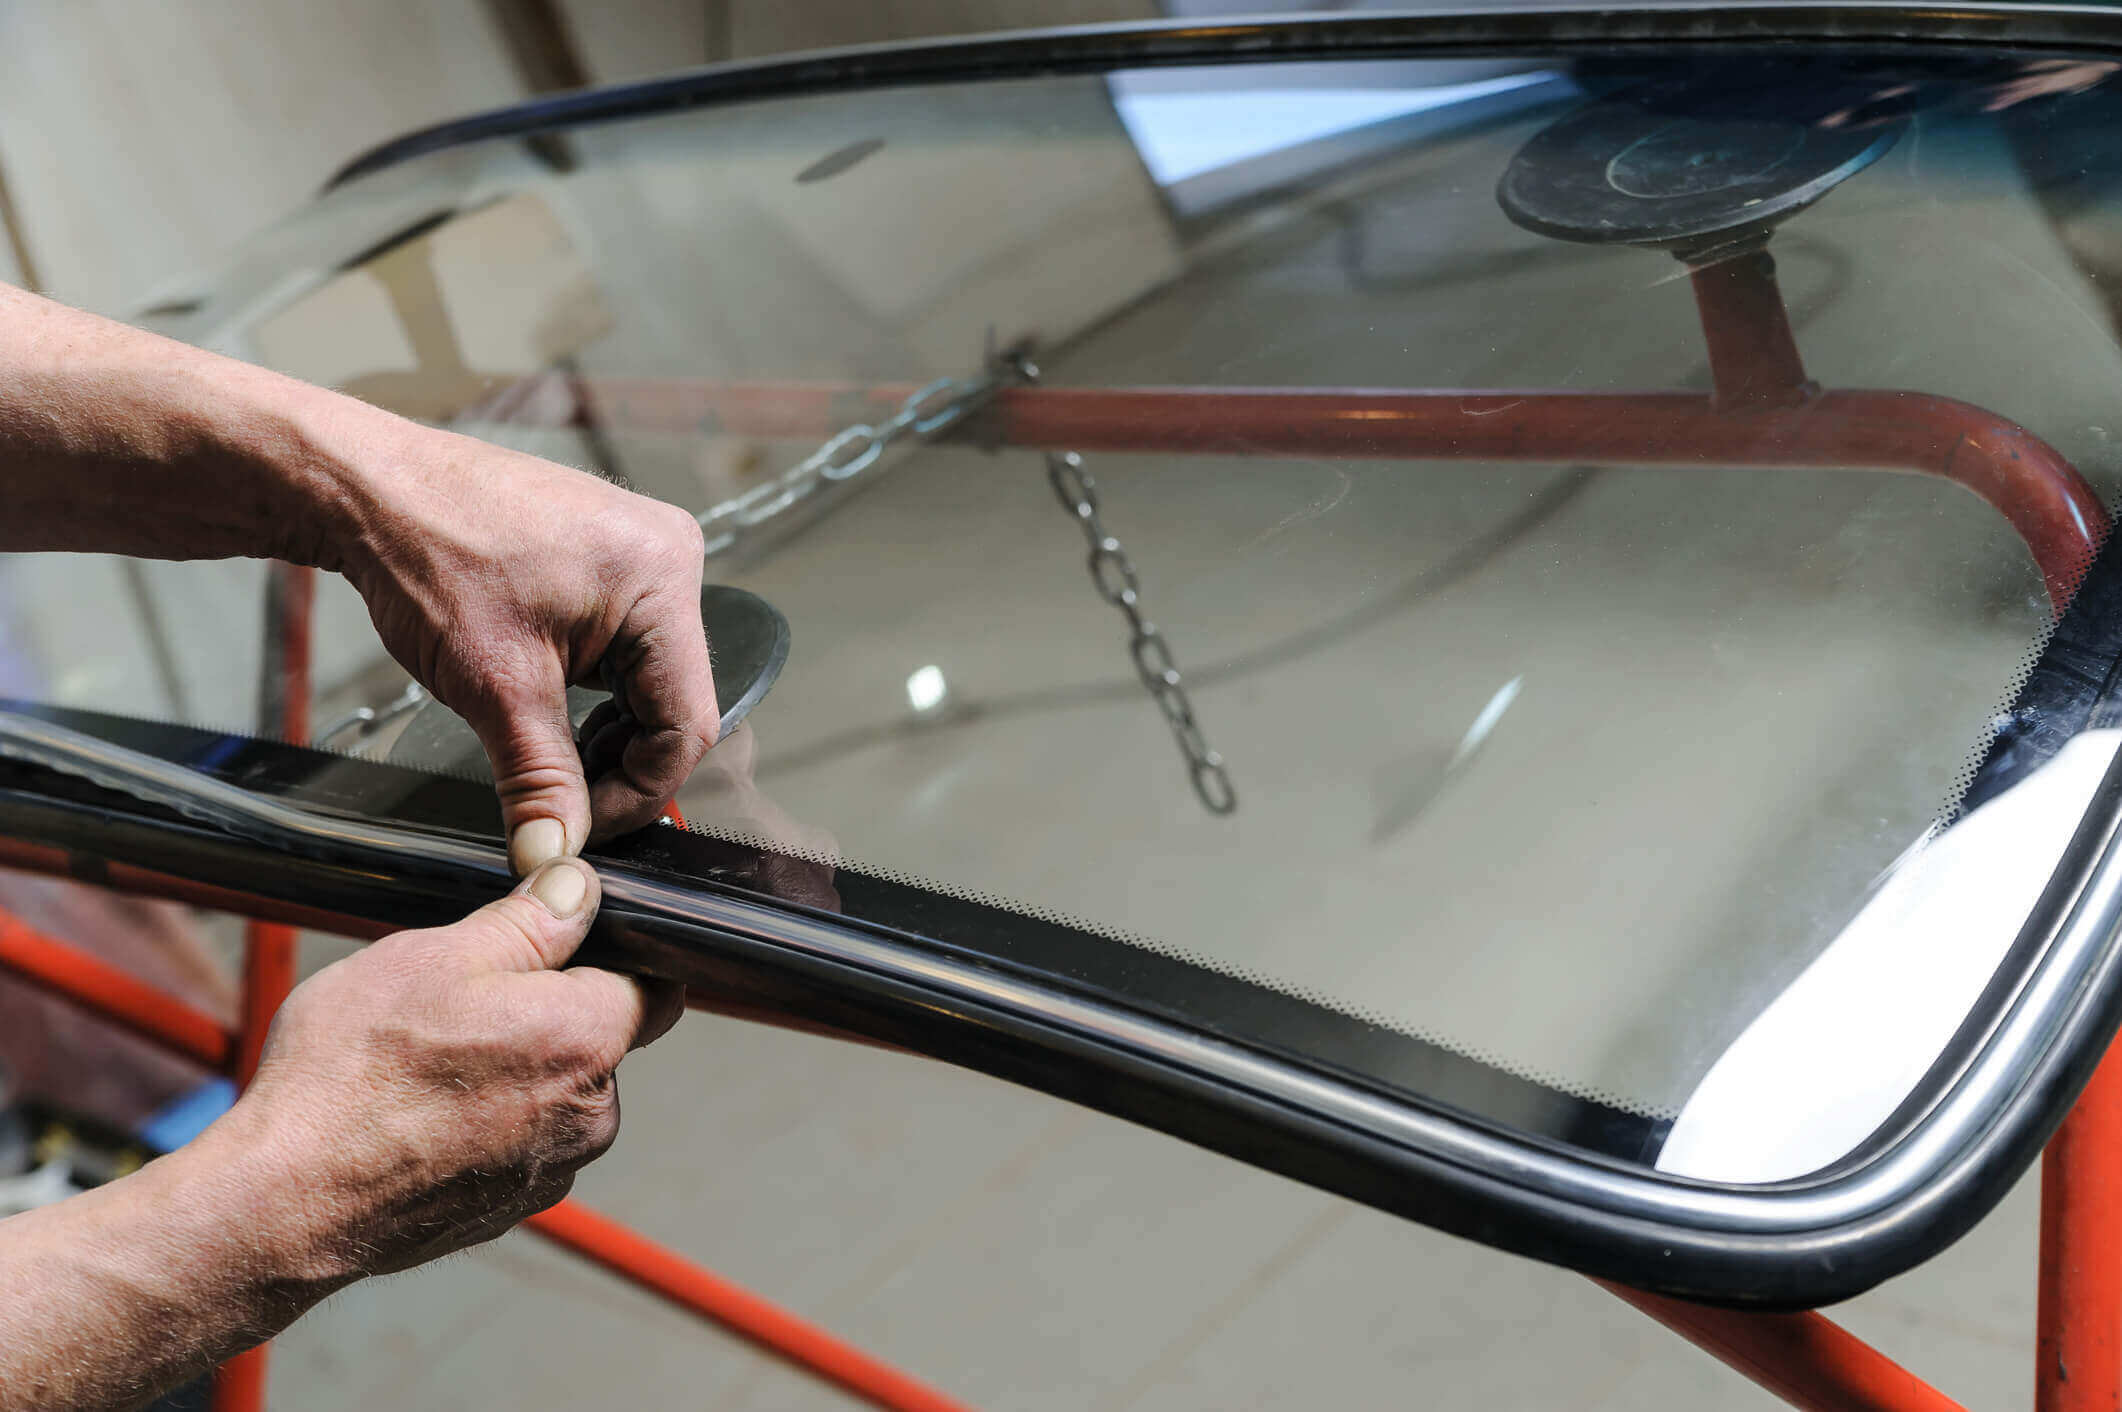 person attaching new car window to frame with adhesive